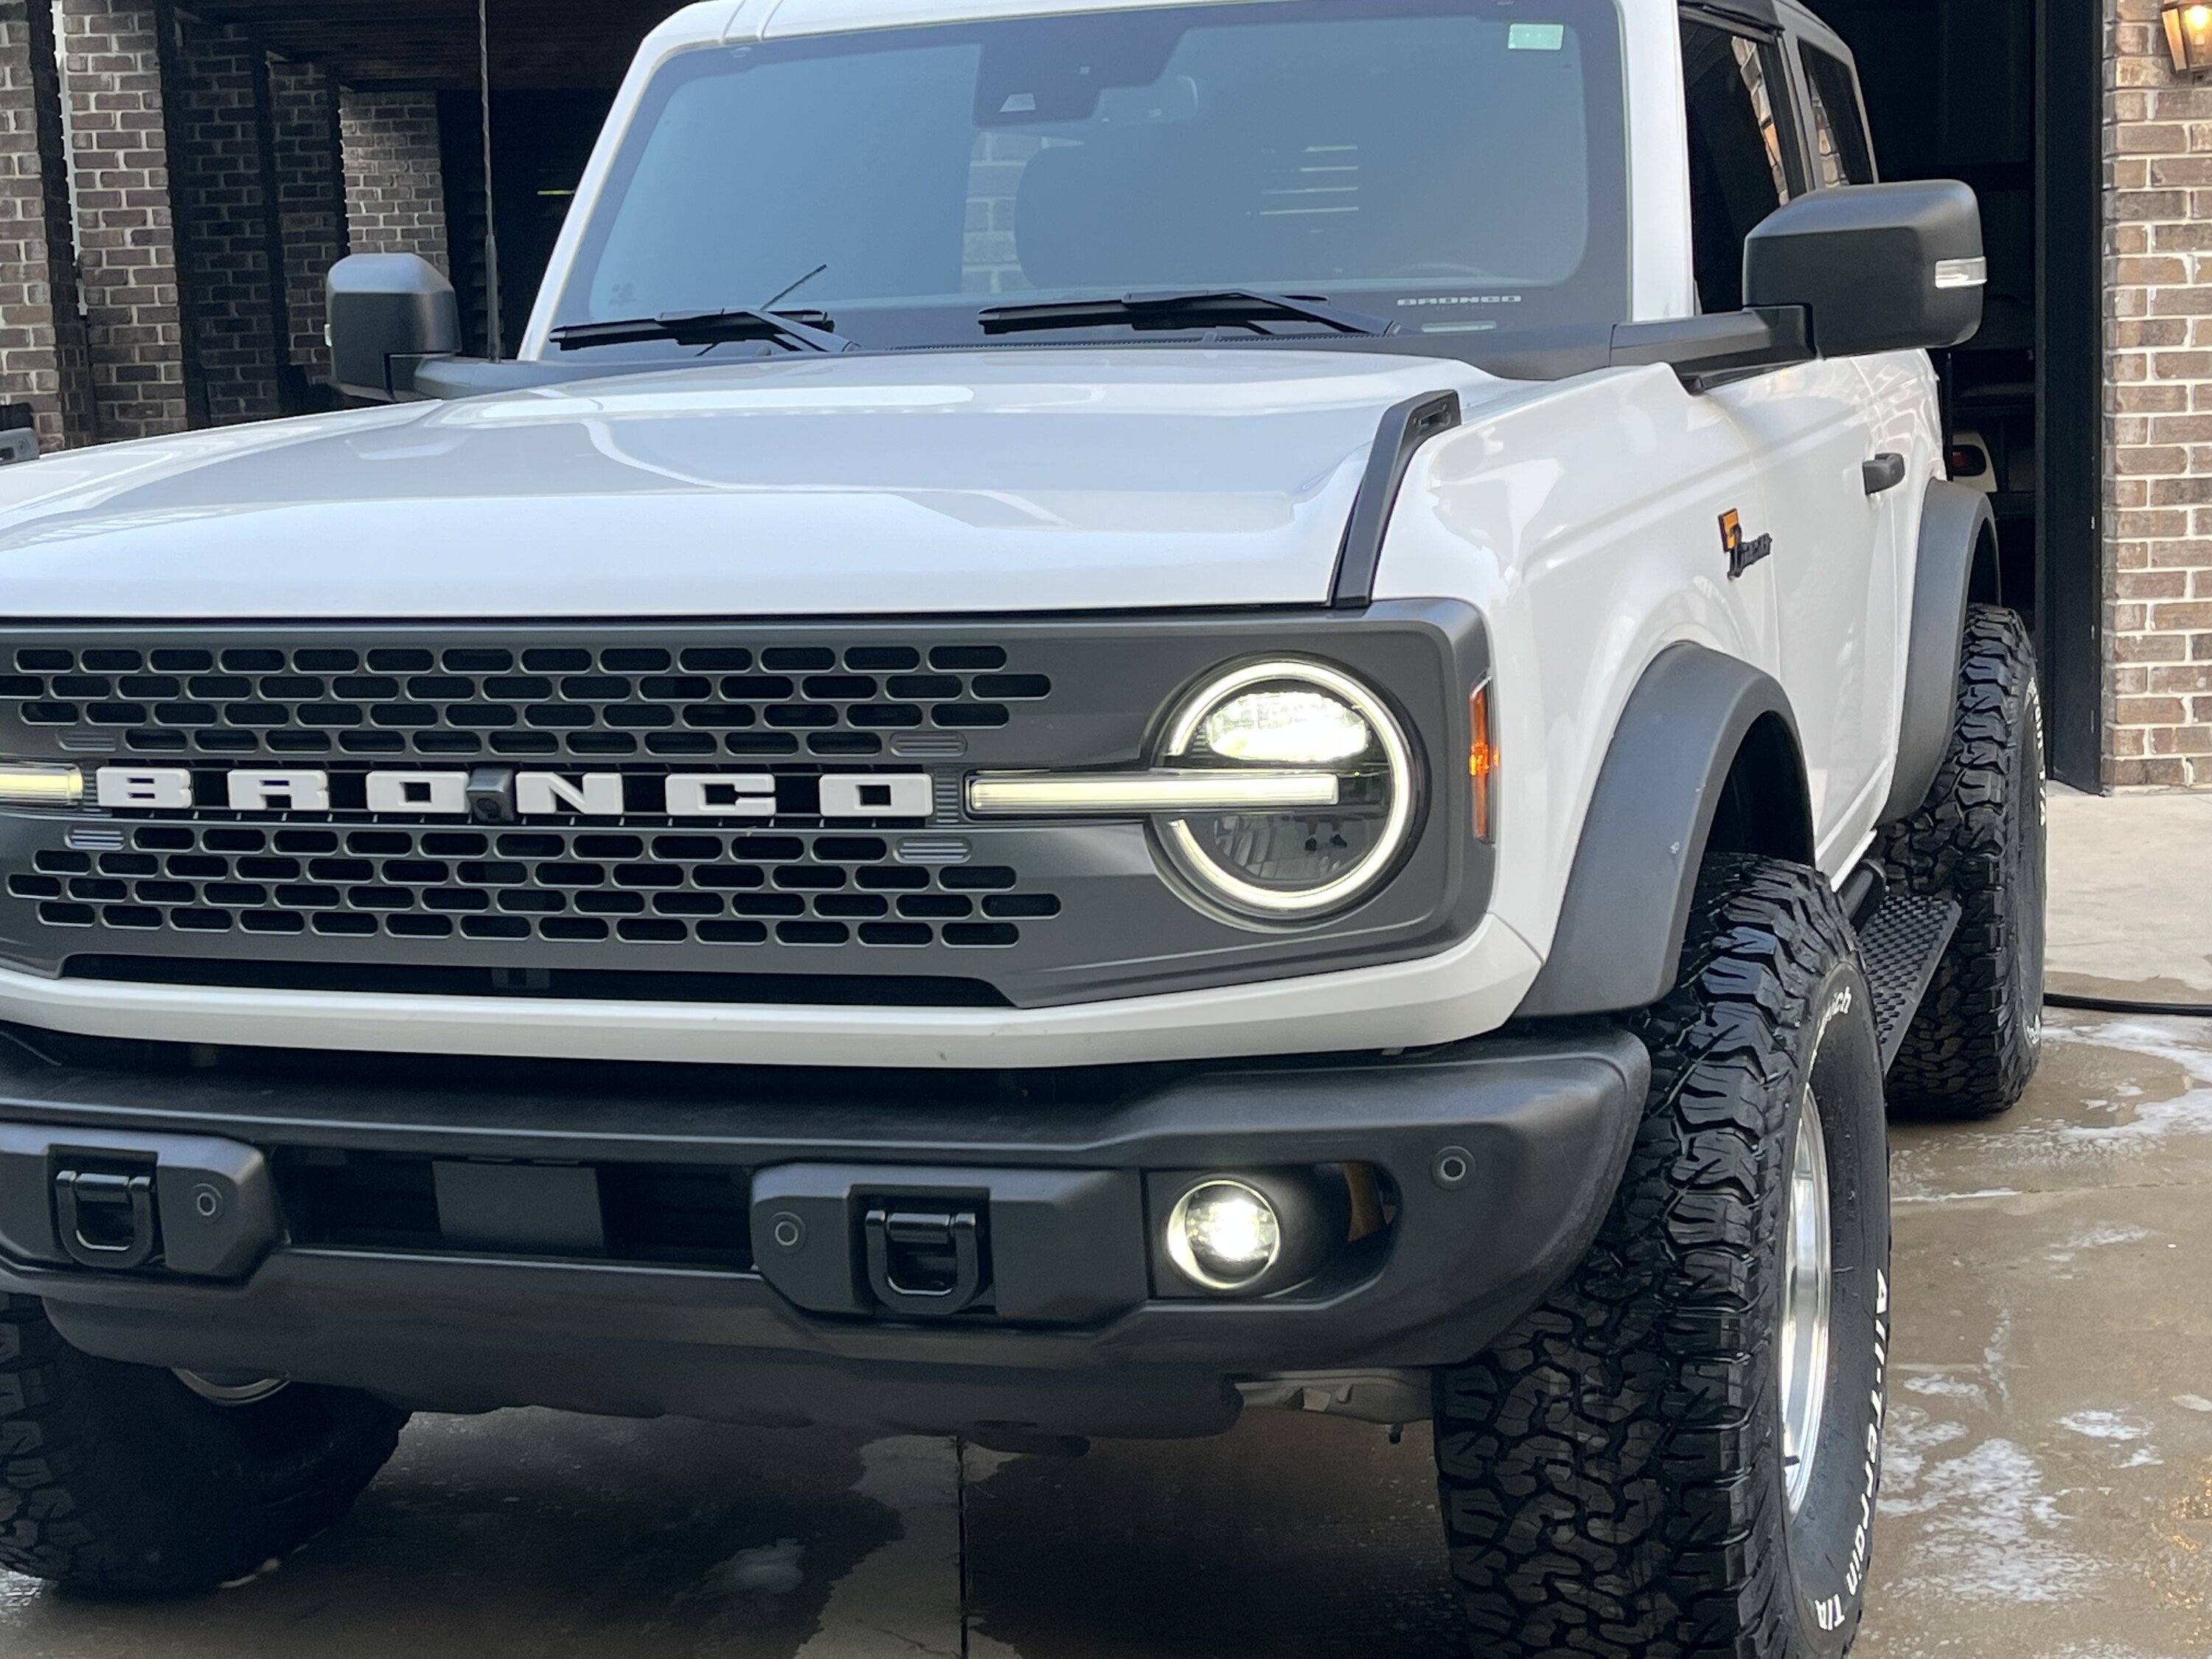 Ford Bronco "Old School" Classic Bronco Looks [Photos Edition] -- post pics of your build! view 2